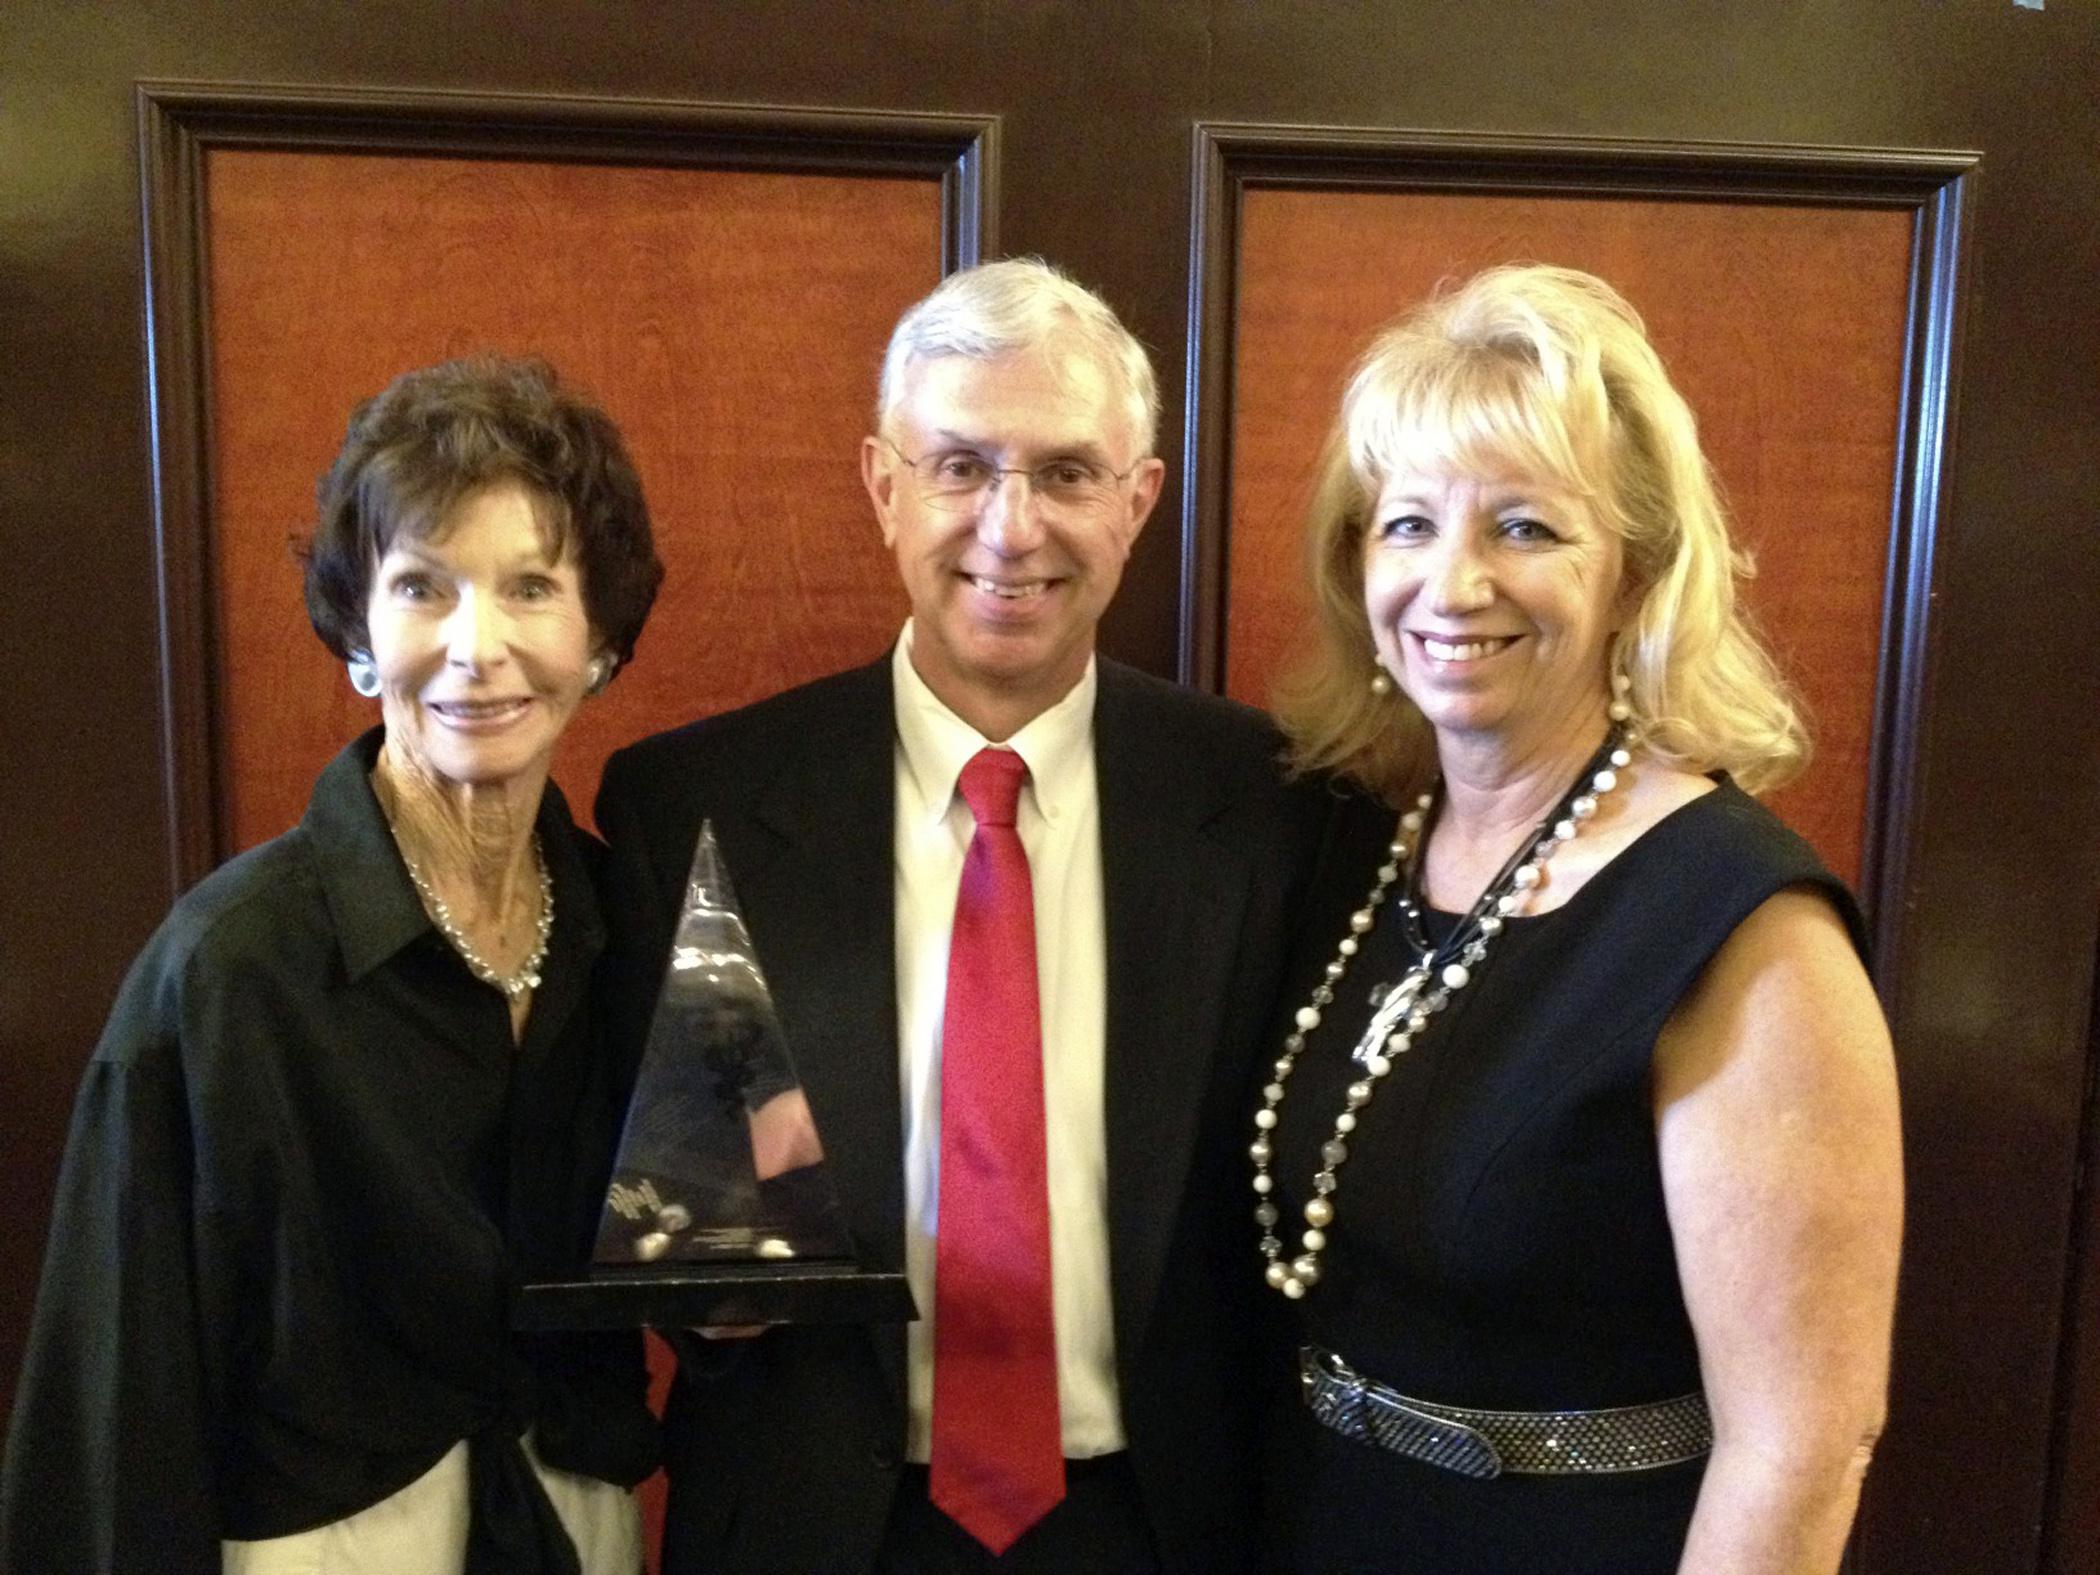 Dr. Phil Bushby (center) celebrates his Animal Welfare award from the American Veterinary Medical Association with Marcia P. Lane (left) and his wife Retha. Bushby holds the Marcia P. Lane Endowed Chair in Humane Ethics and Animal Welfare at the Mississippi State University College of Veterinary Medicine. (Submitted Photo)